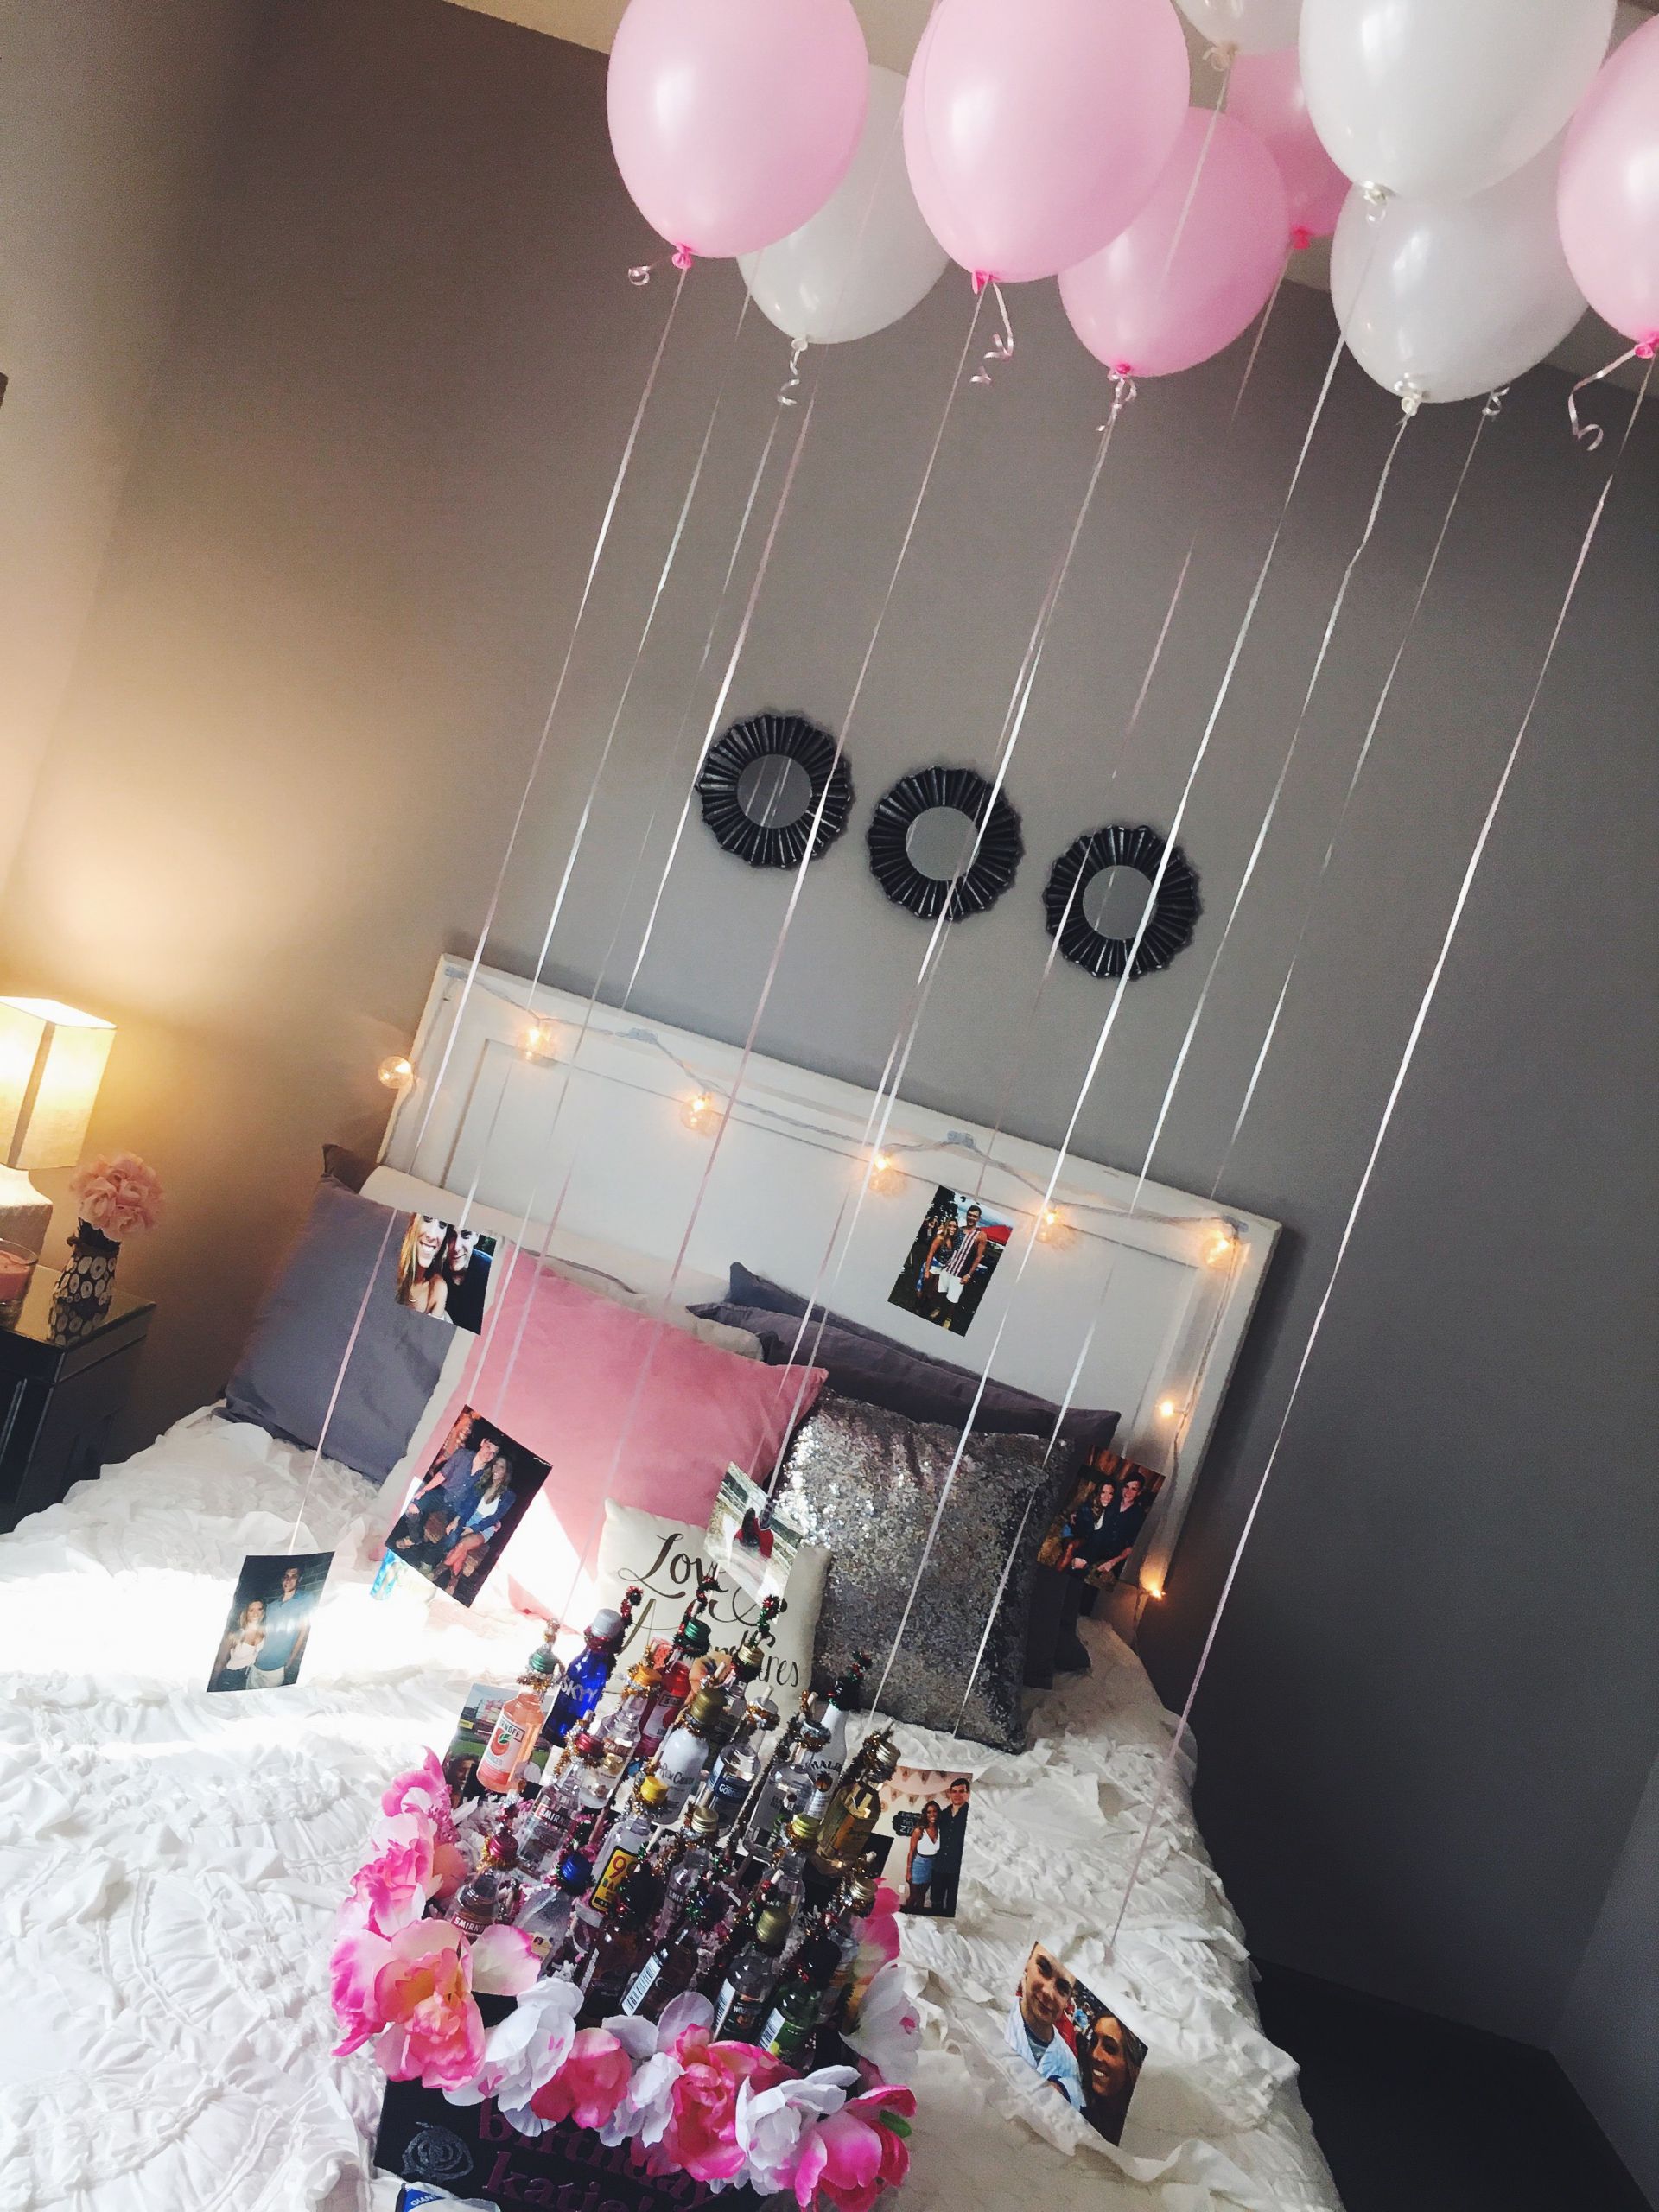 Birthday Gift Ideas For Girlfriend
 easy and cute decorations for a friend or girlfriends 21st